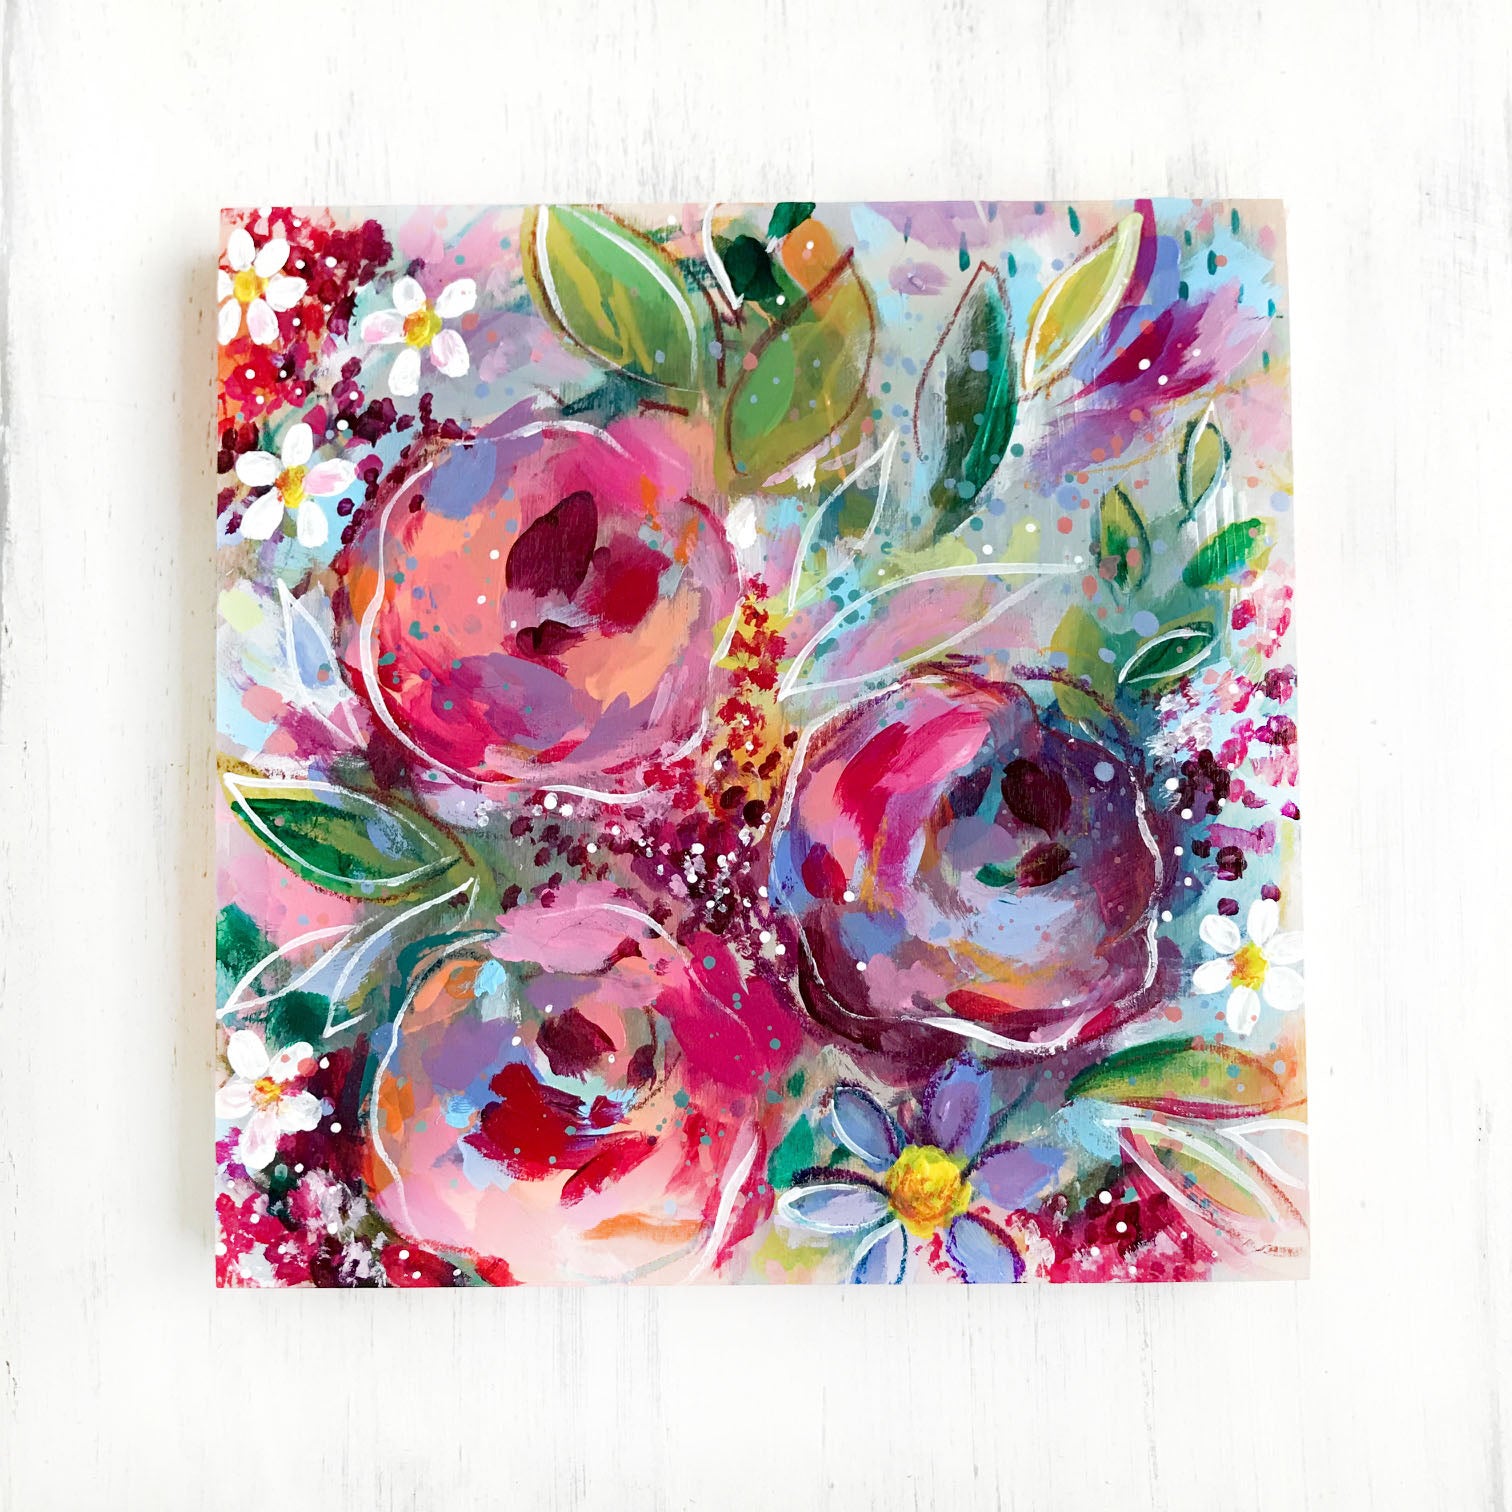 New Spring Floral Mixed Media Painting on 8x8 inch wood panel no.7 - Bethany Joy Art